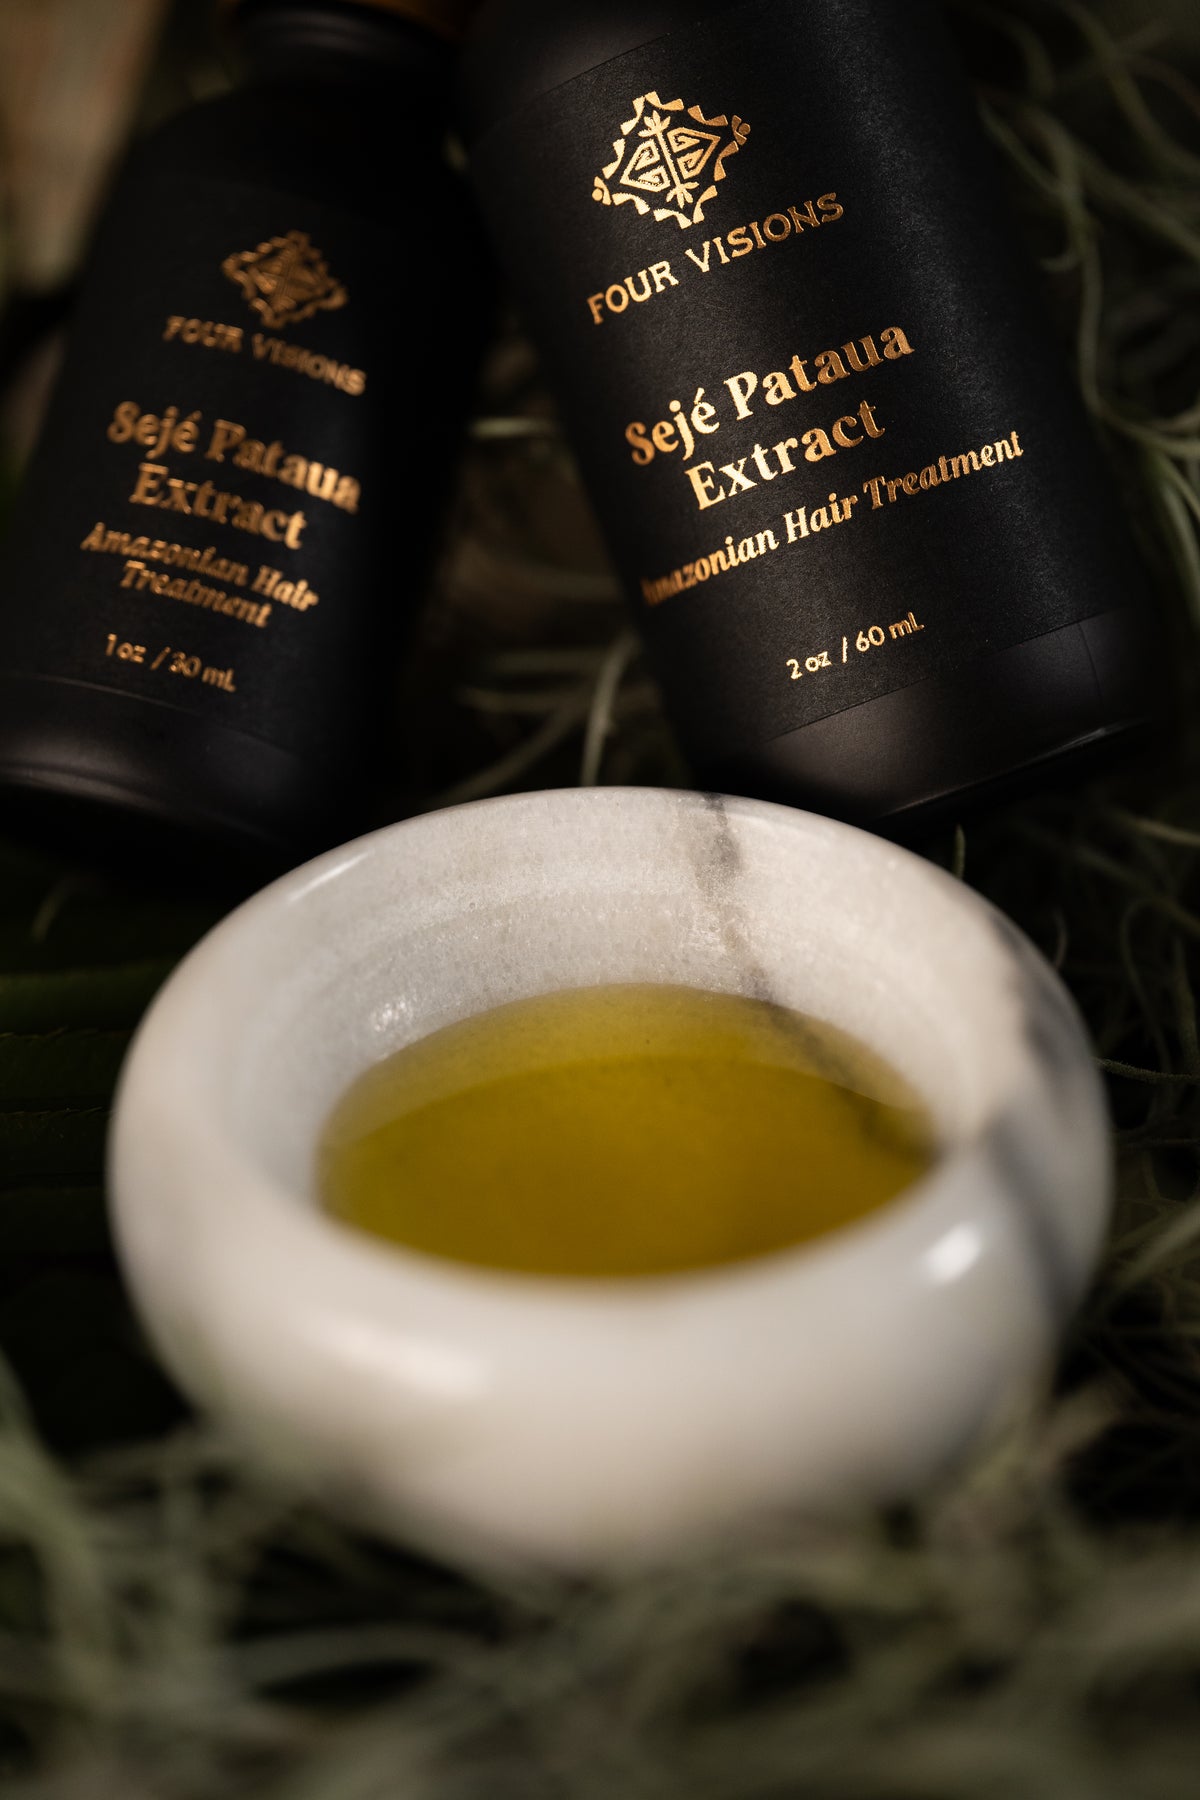 Sejé Pataua Extract: Amazonian Hair and Skin Treatment